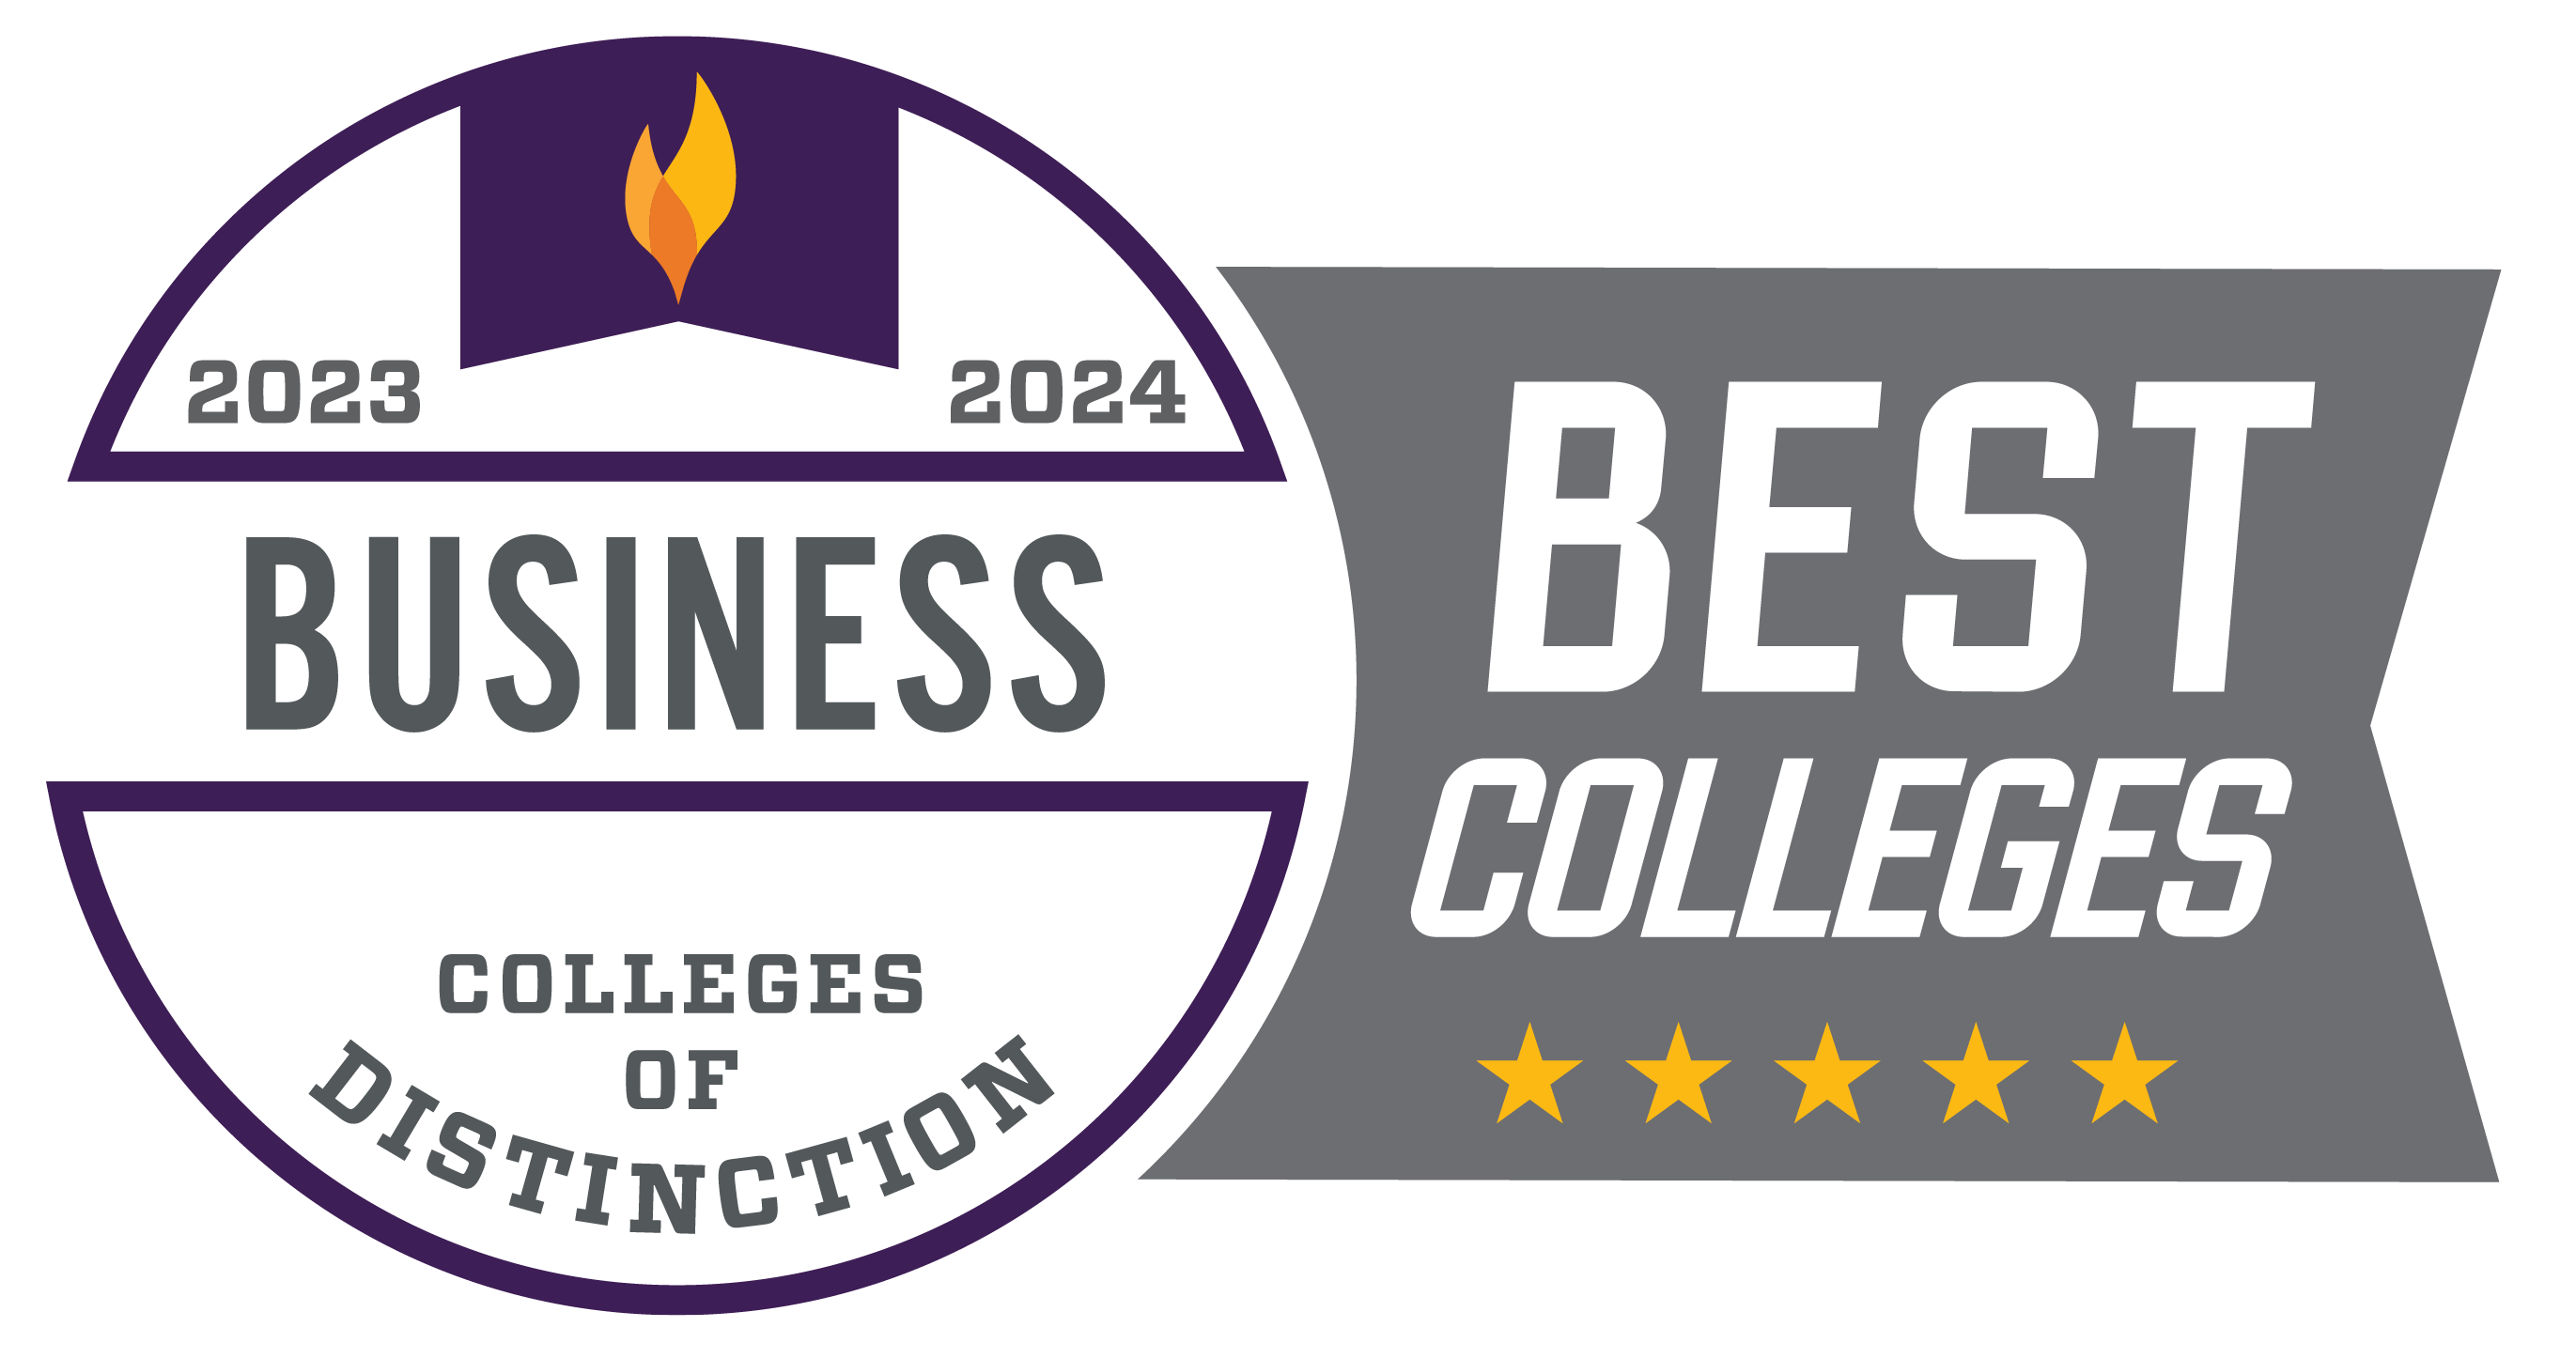 Best Colleges in Business 